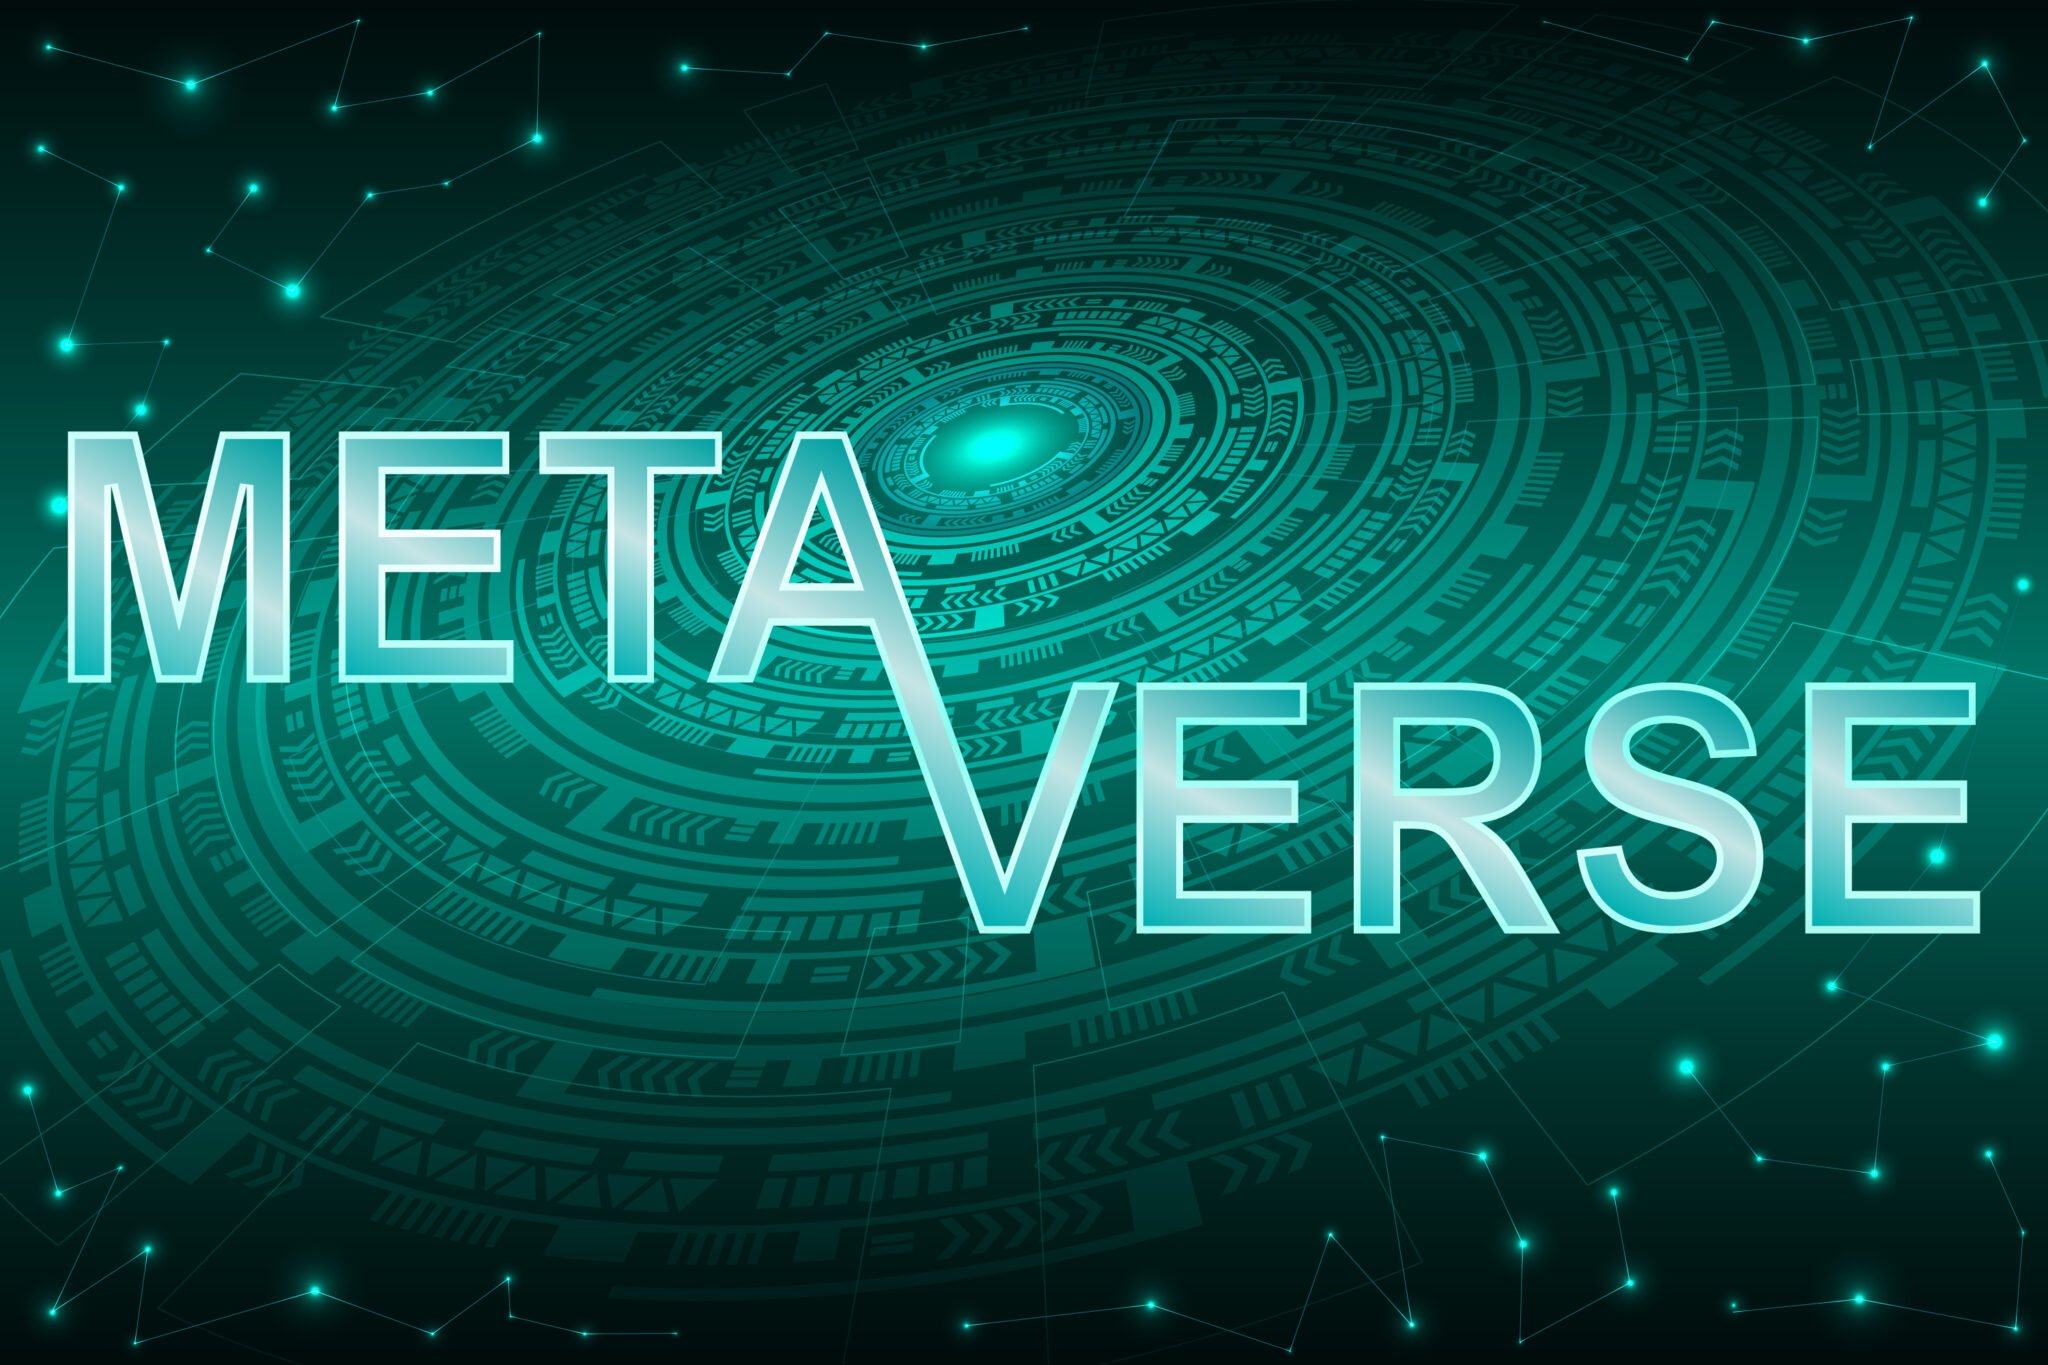 Metaverse text design on abstract, futuristic, green background.  Metaverse, virtual reality, augmented reality and blockchain technology, 3D user interface experience.